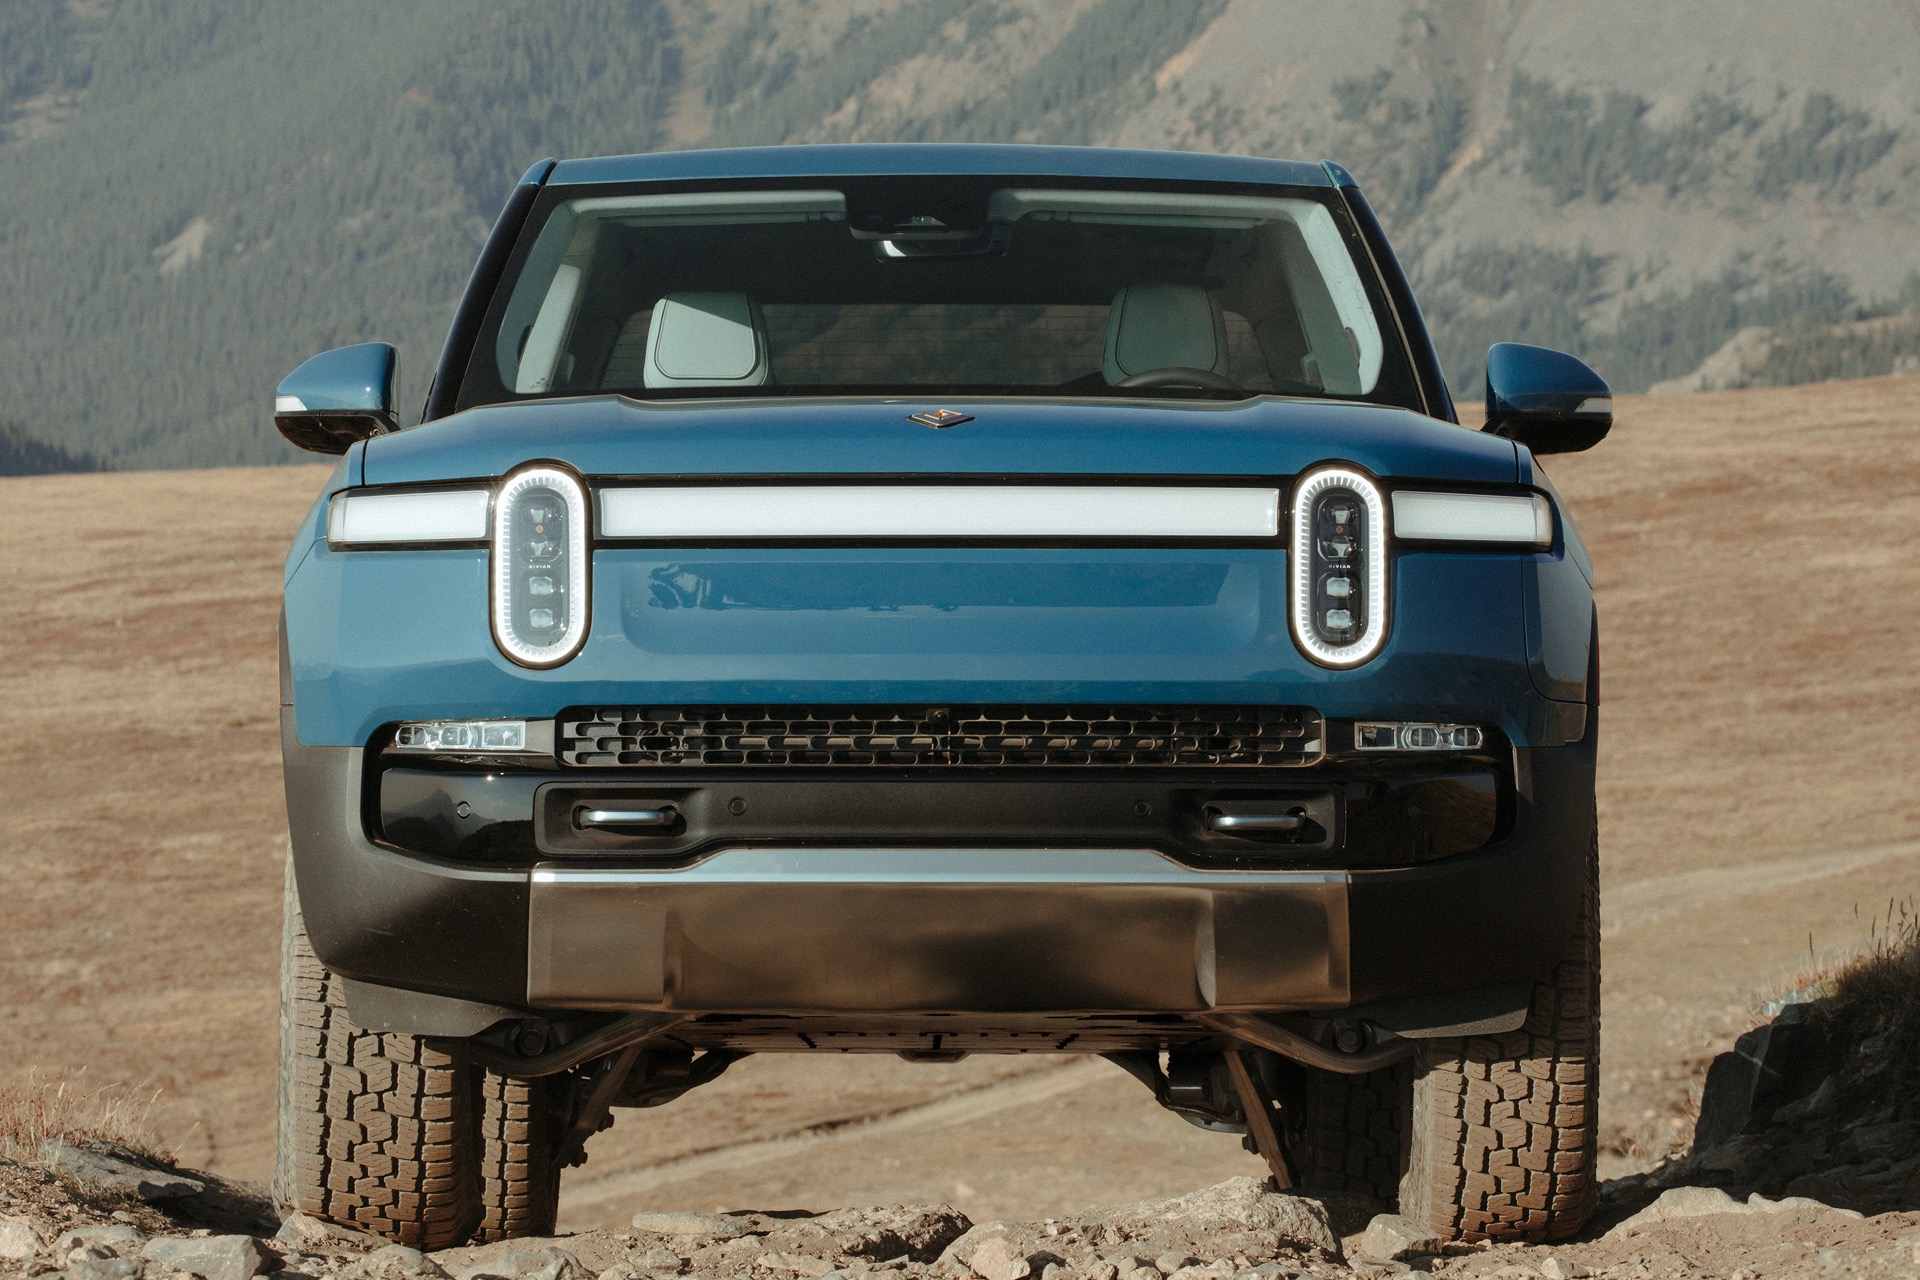 Rivian walks back price increase for reservation holders, CEO apologizes